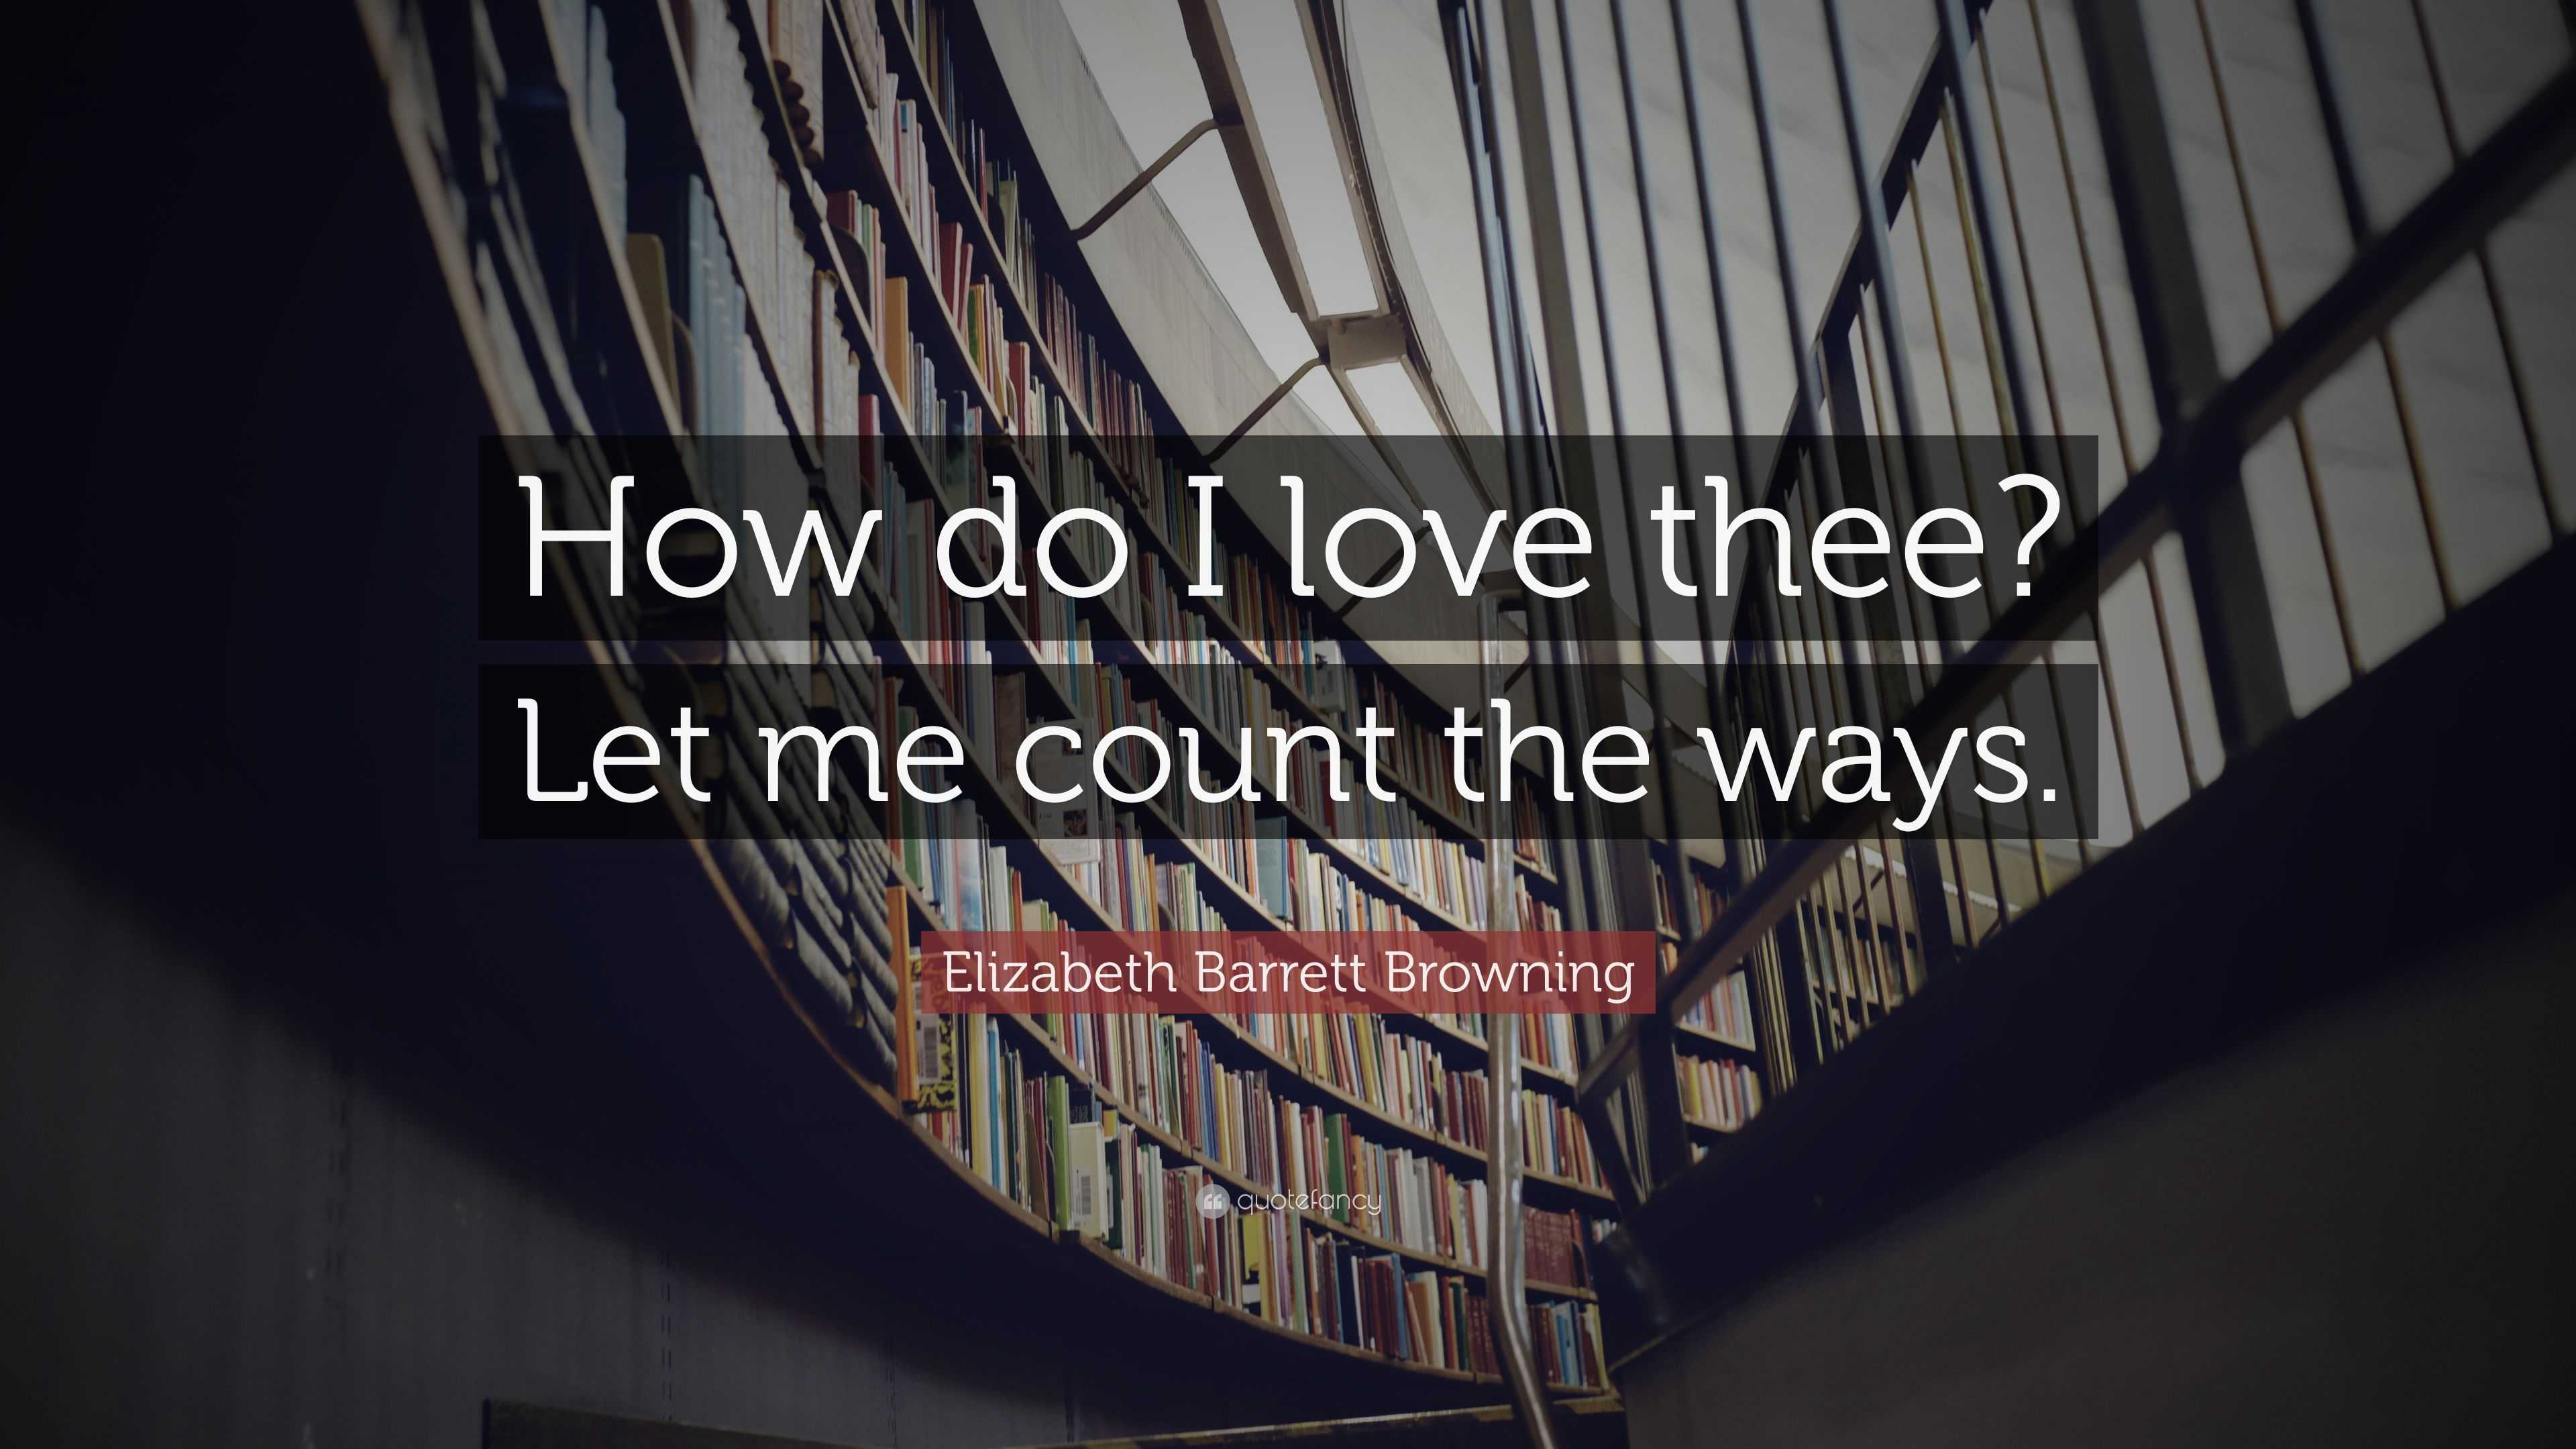 Elizabeth Barrett Browning Quote “how Do I Love Thee Let Me Count The Ways ”